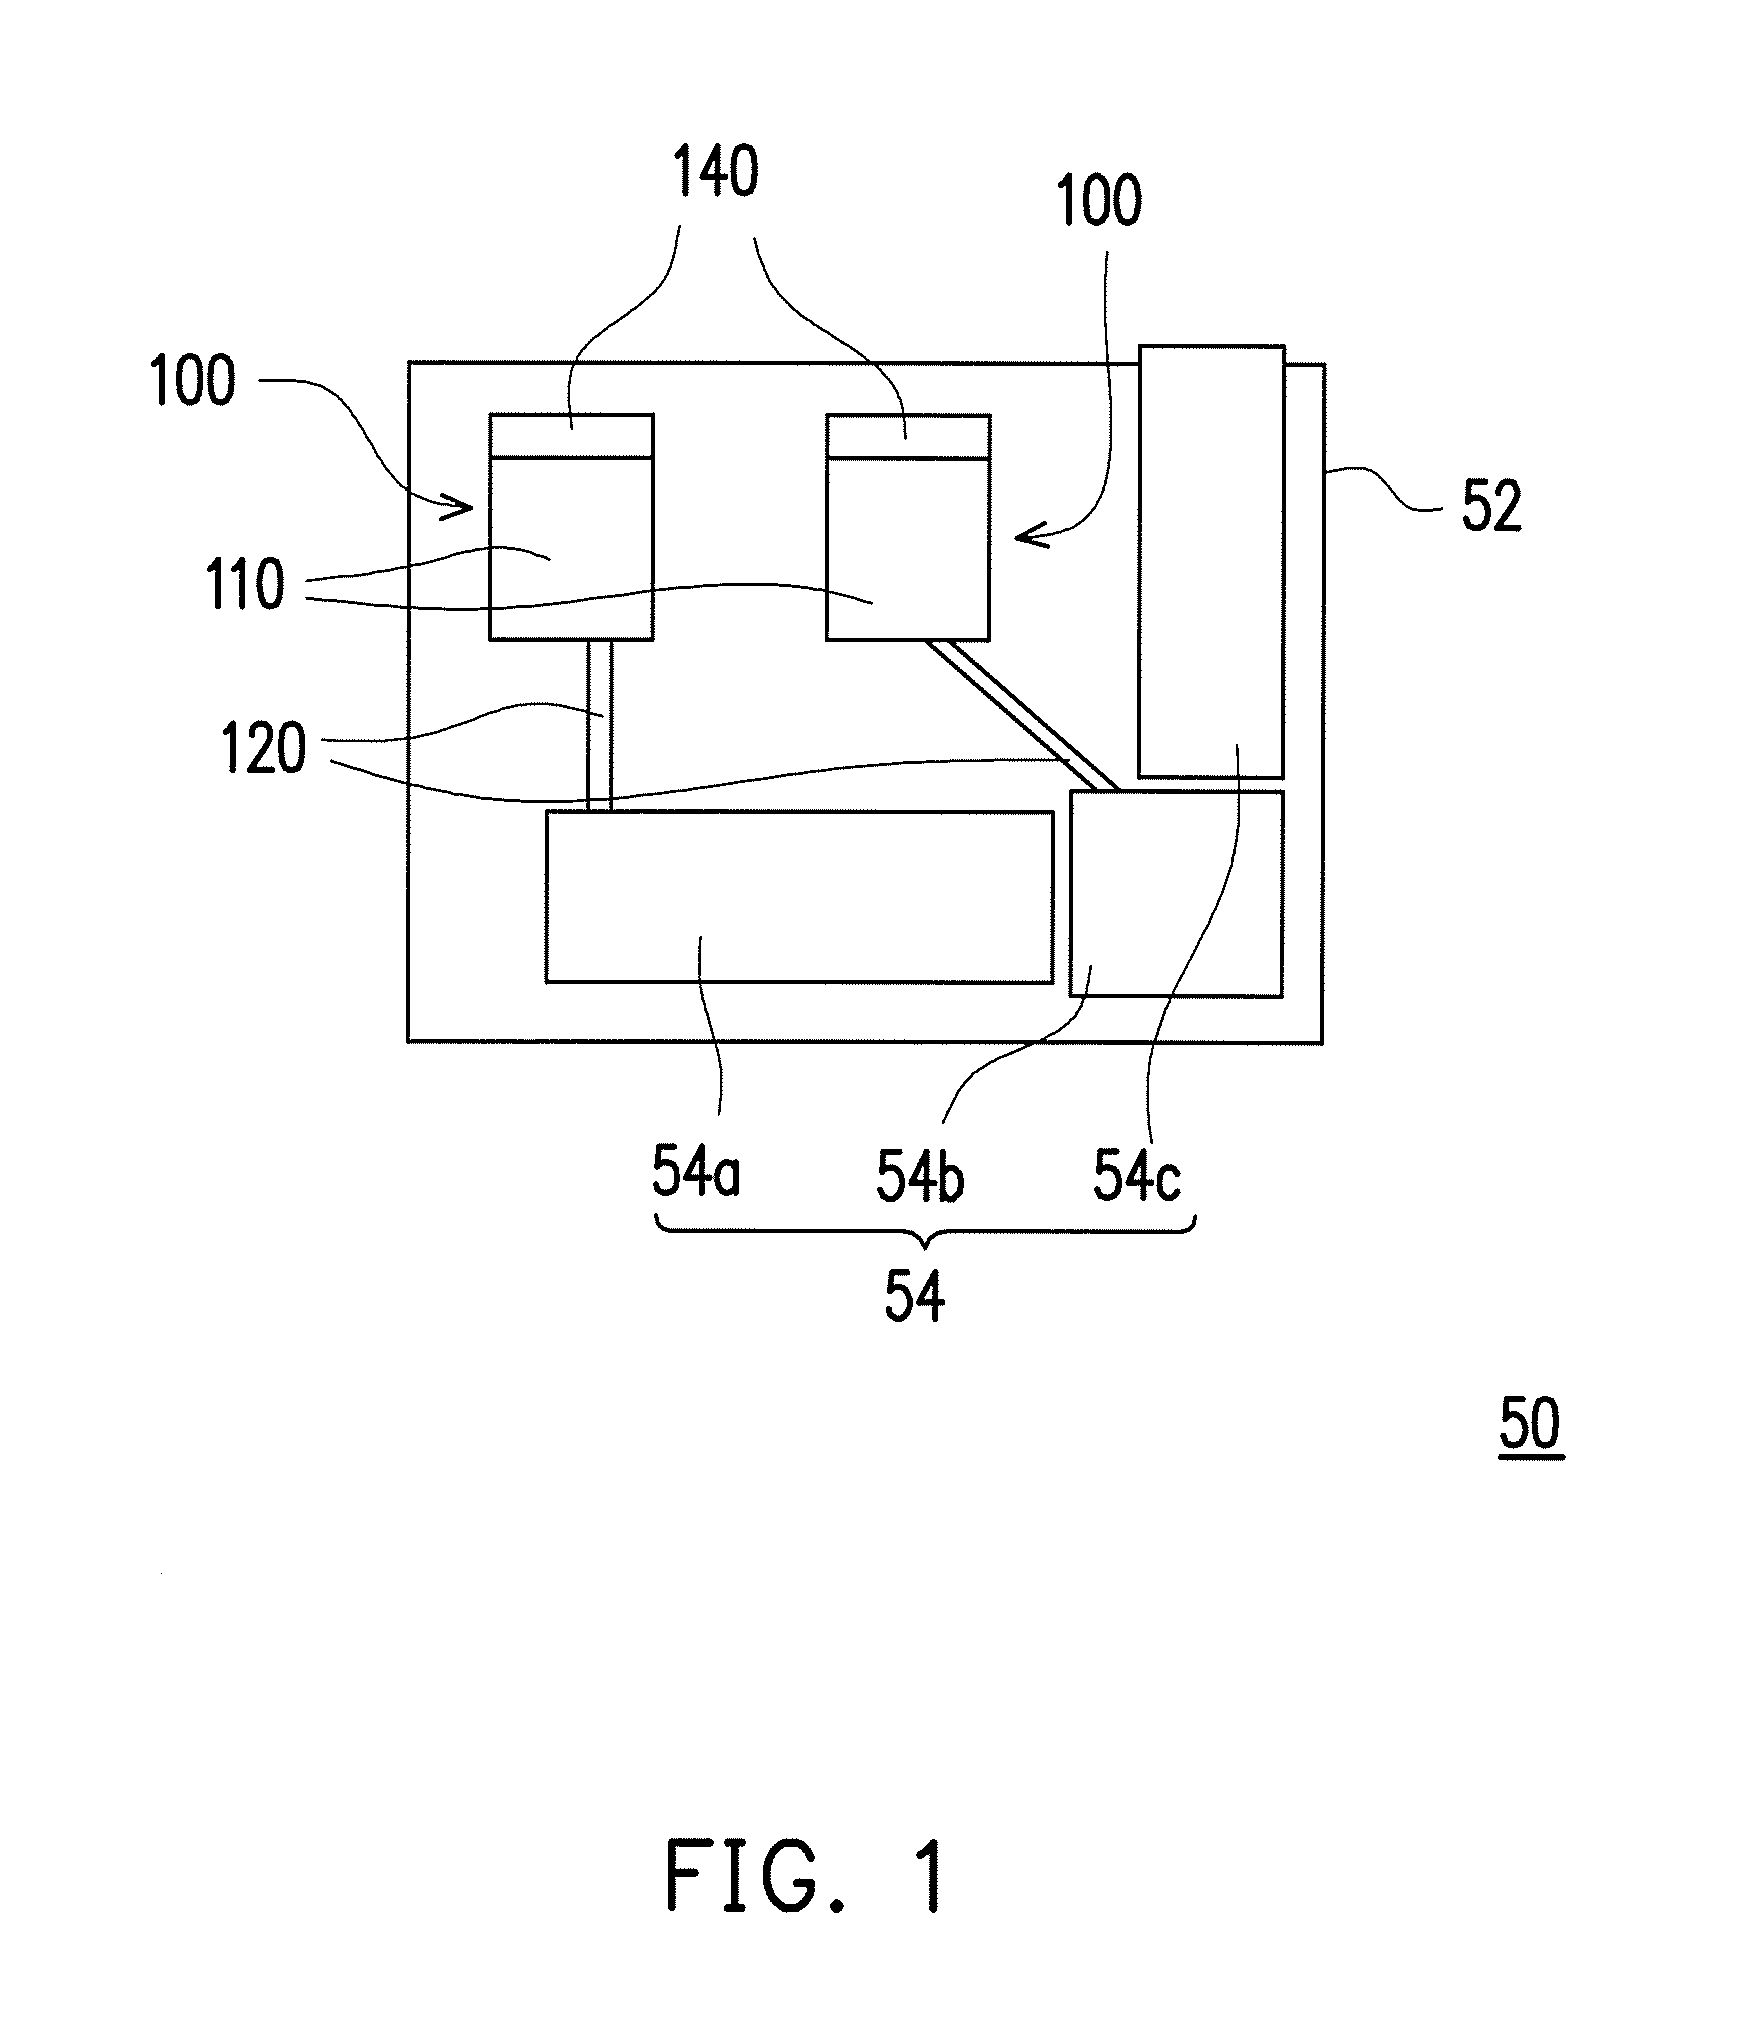 Heat dissipating module having turbulent structures